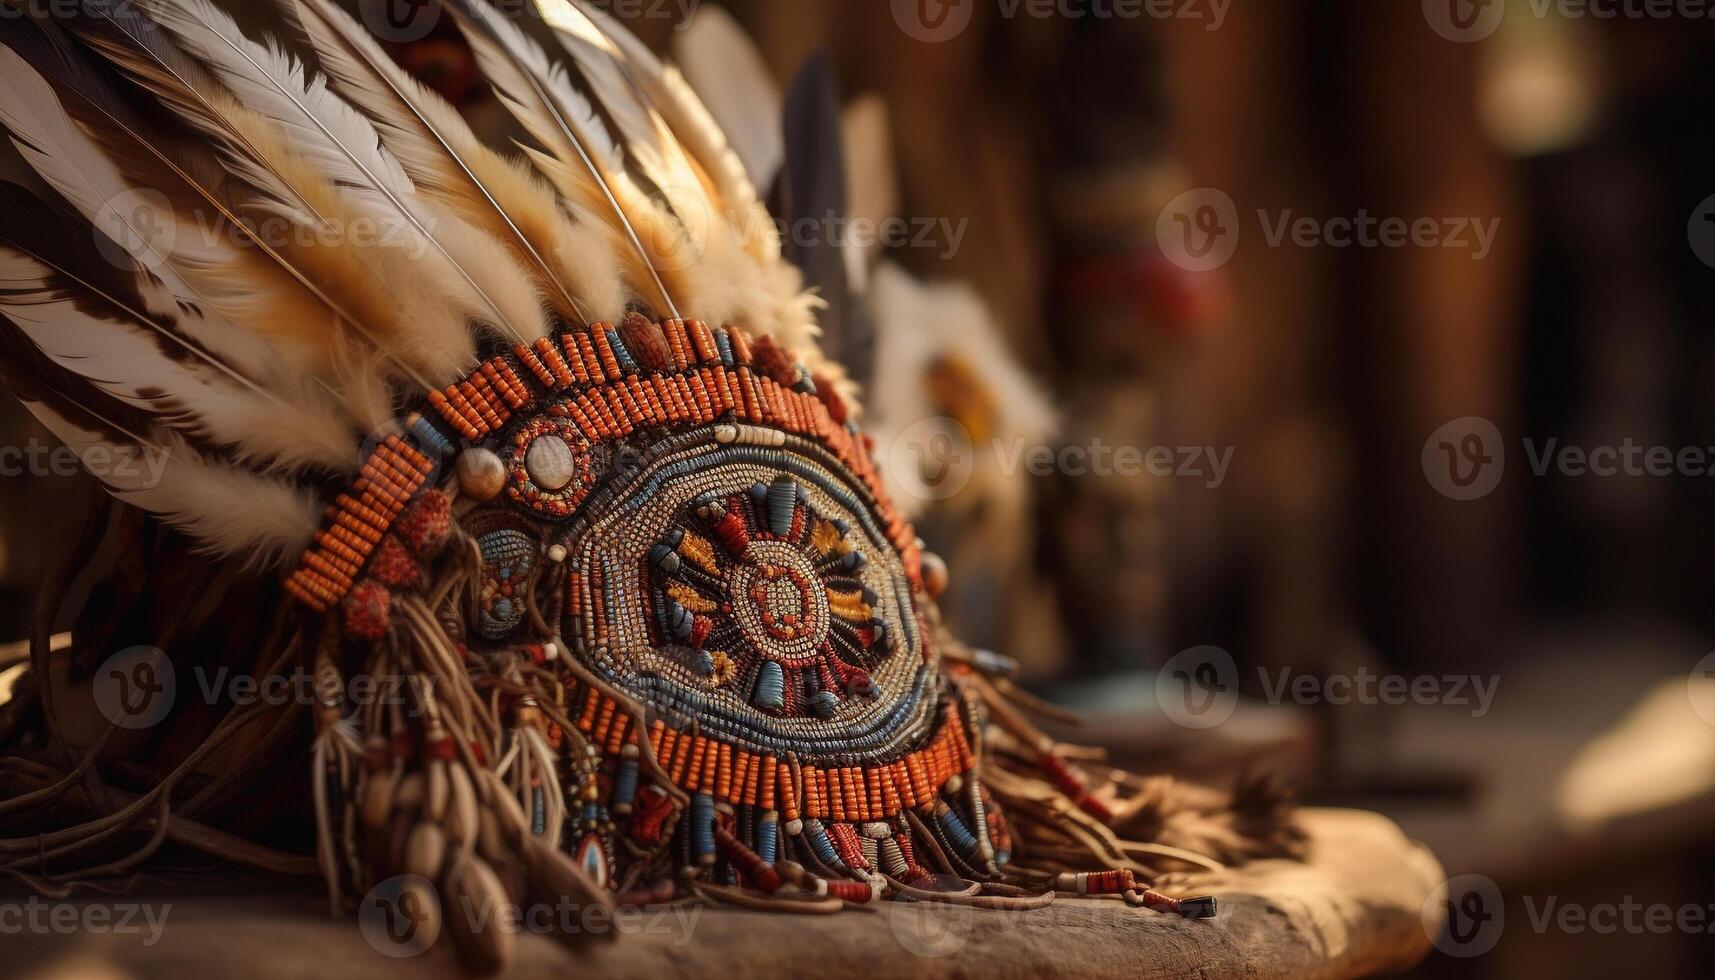 Vibrant colors and patterns adorn indigenous culture generated by AI photo